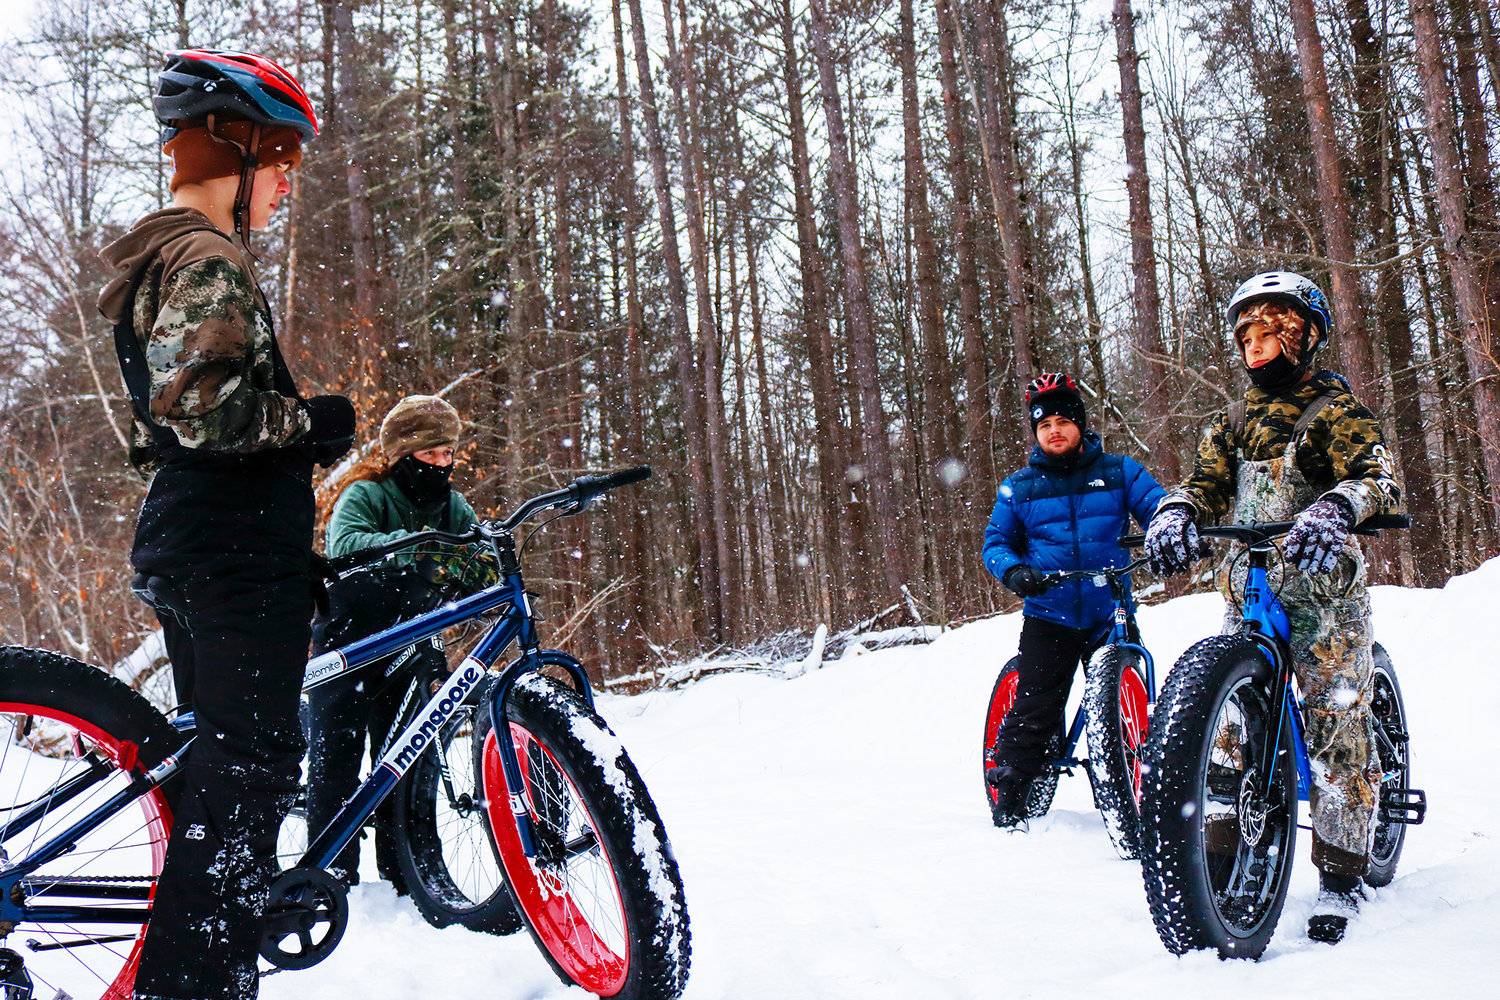 The Leatherstocking Council, Boy Scouts of America recently received a grant from the Edwin J. Wadas Foundation to purchase a dozen new snow bikes, three dozen mountain bikes and safety equipment for Scouts visiting Camp Kingsley.